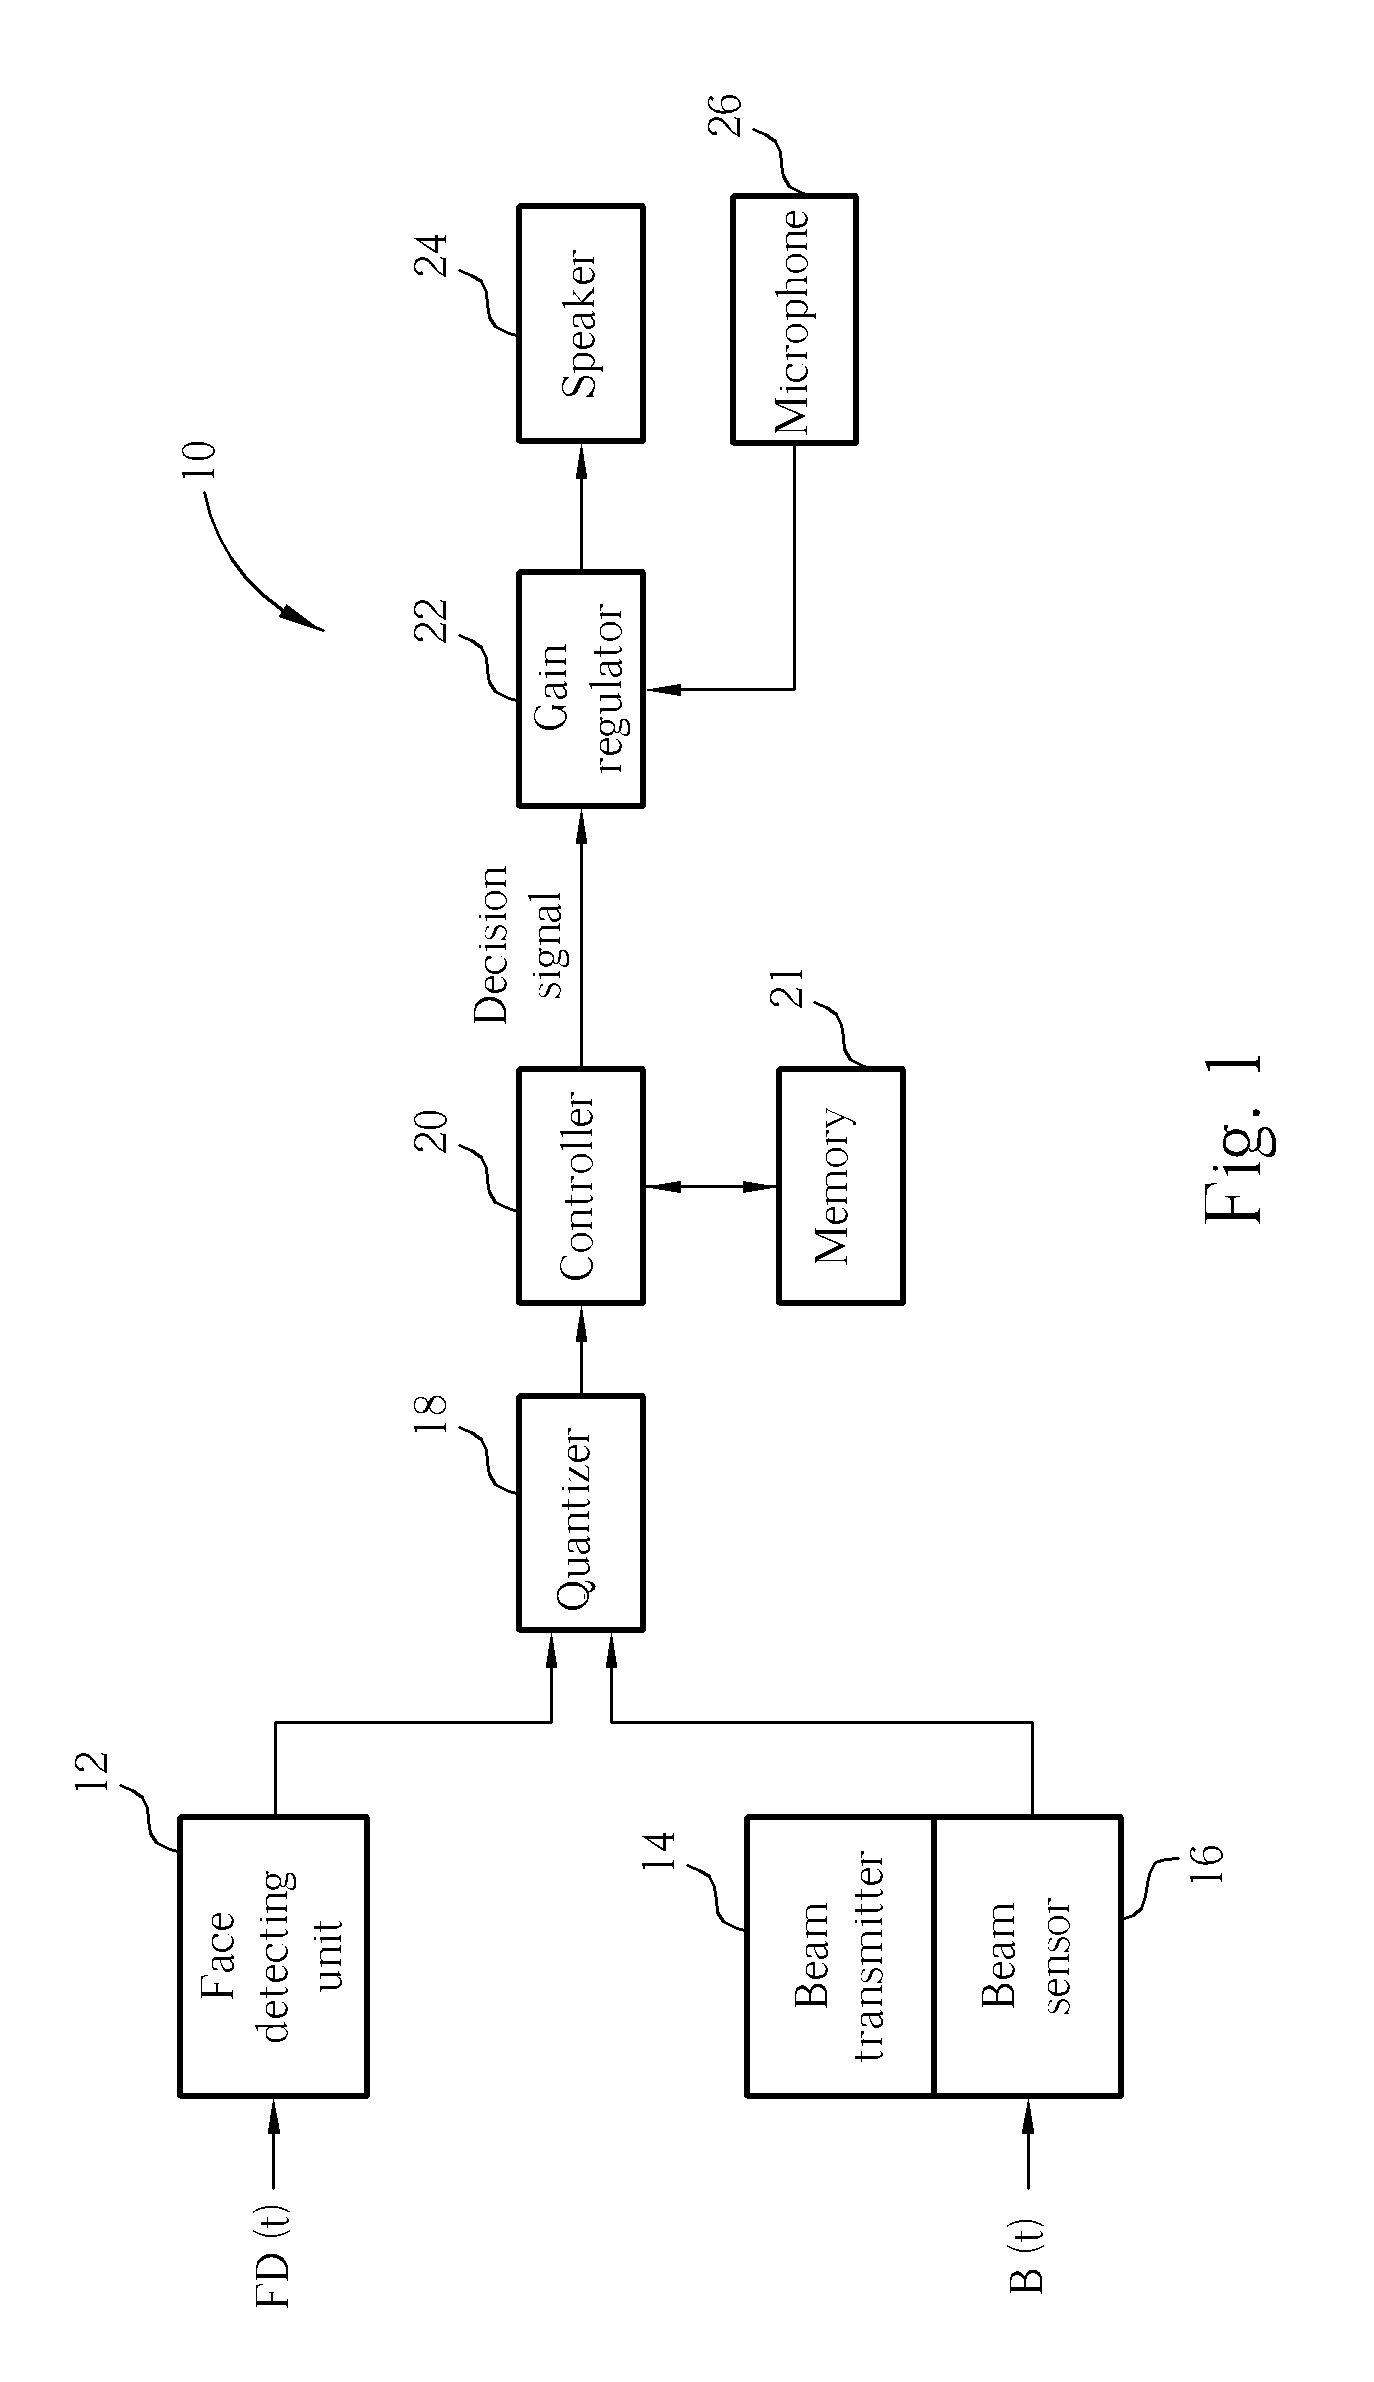 Active gain adjusting method and related system based on distance from users